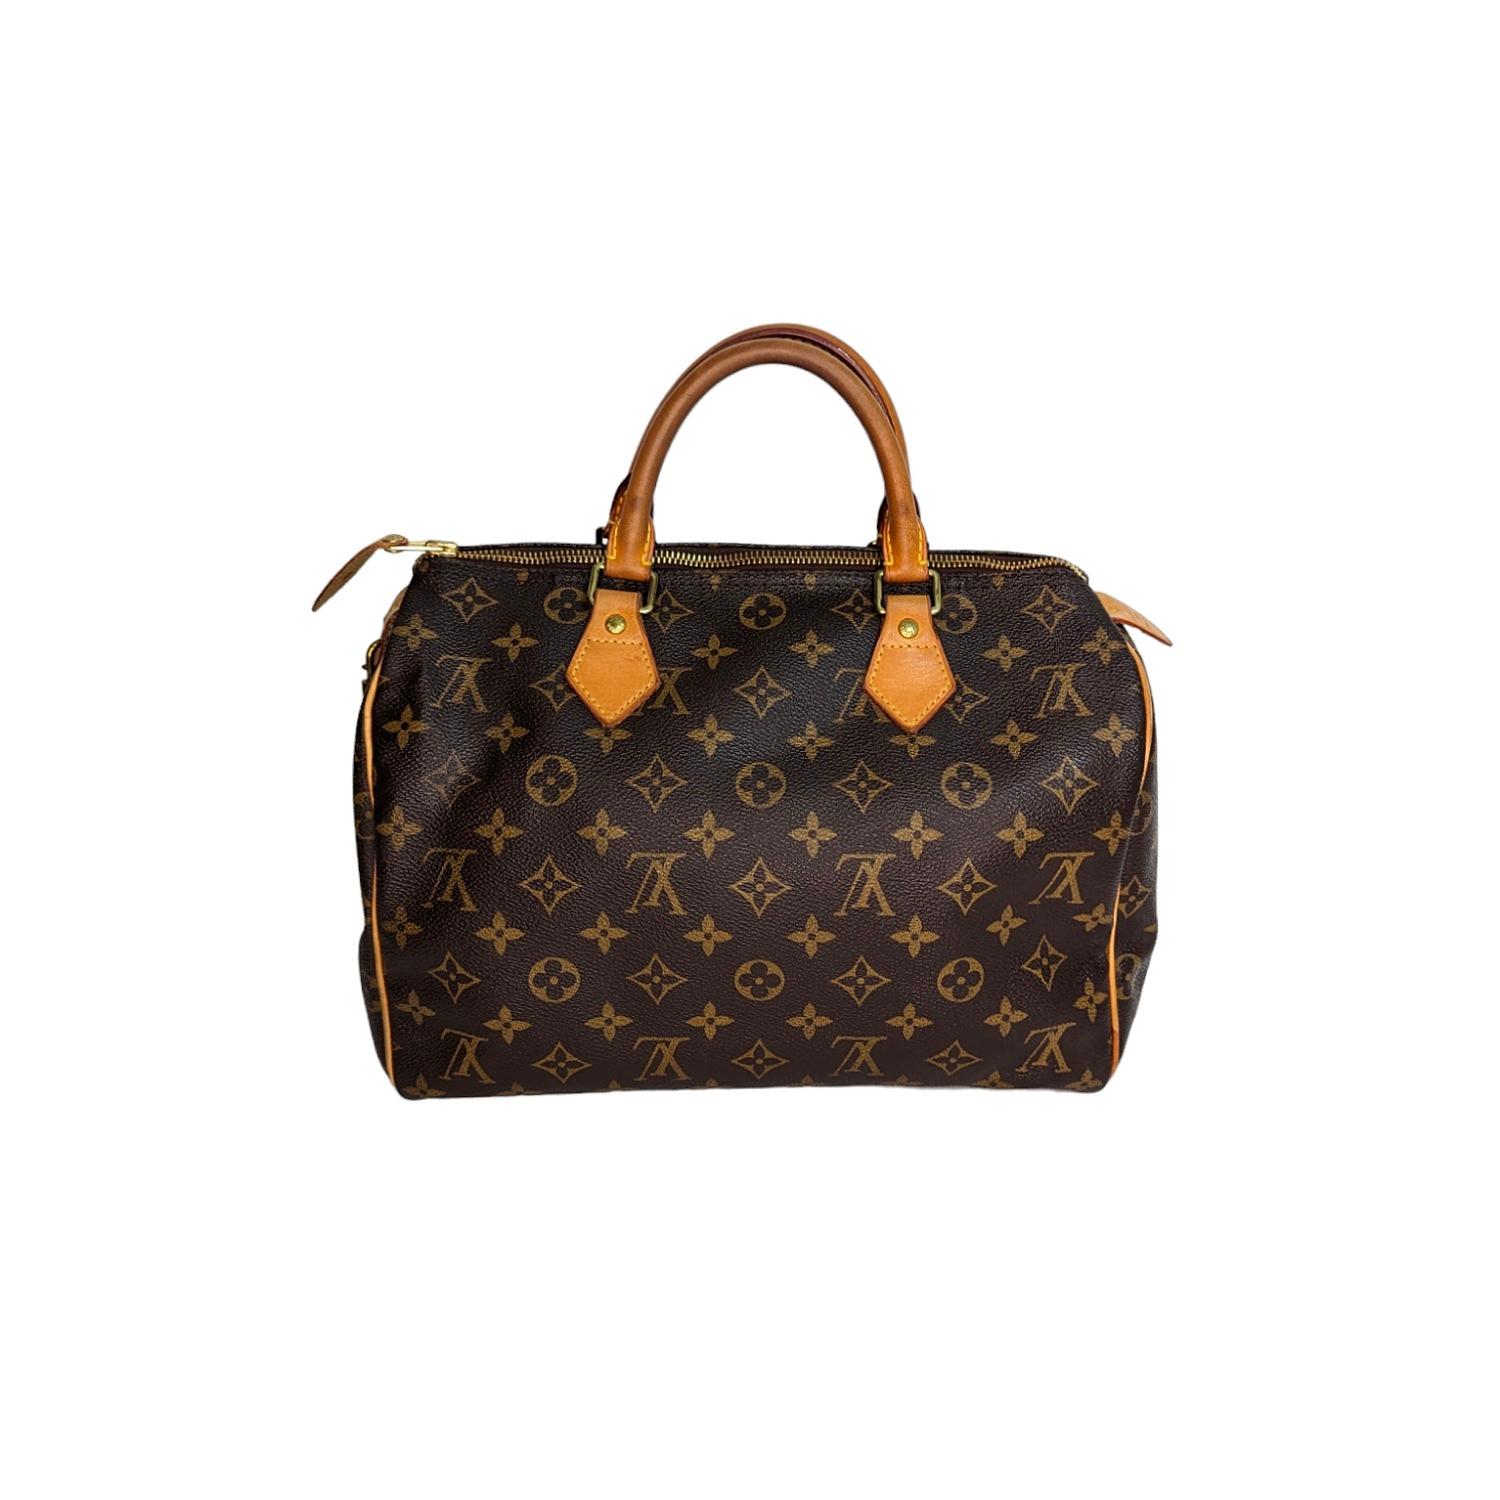 <p><strong>Louis Vuitton 2014 Monogram Canvas Speedy 30 Bag</strong>
<br><br>
This stylish speedy 30 is crafted of monogram canvas, dual rounded handles and trimmings in natural cowhide leather. Featuring a golden color metallic hardware, single zip